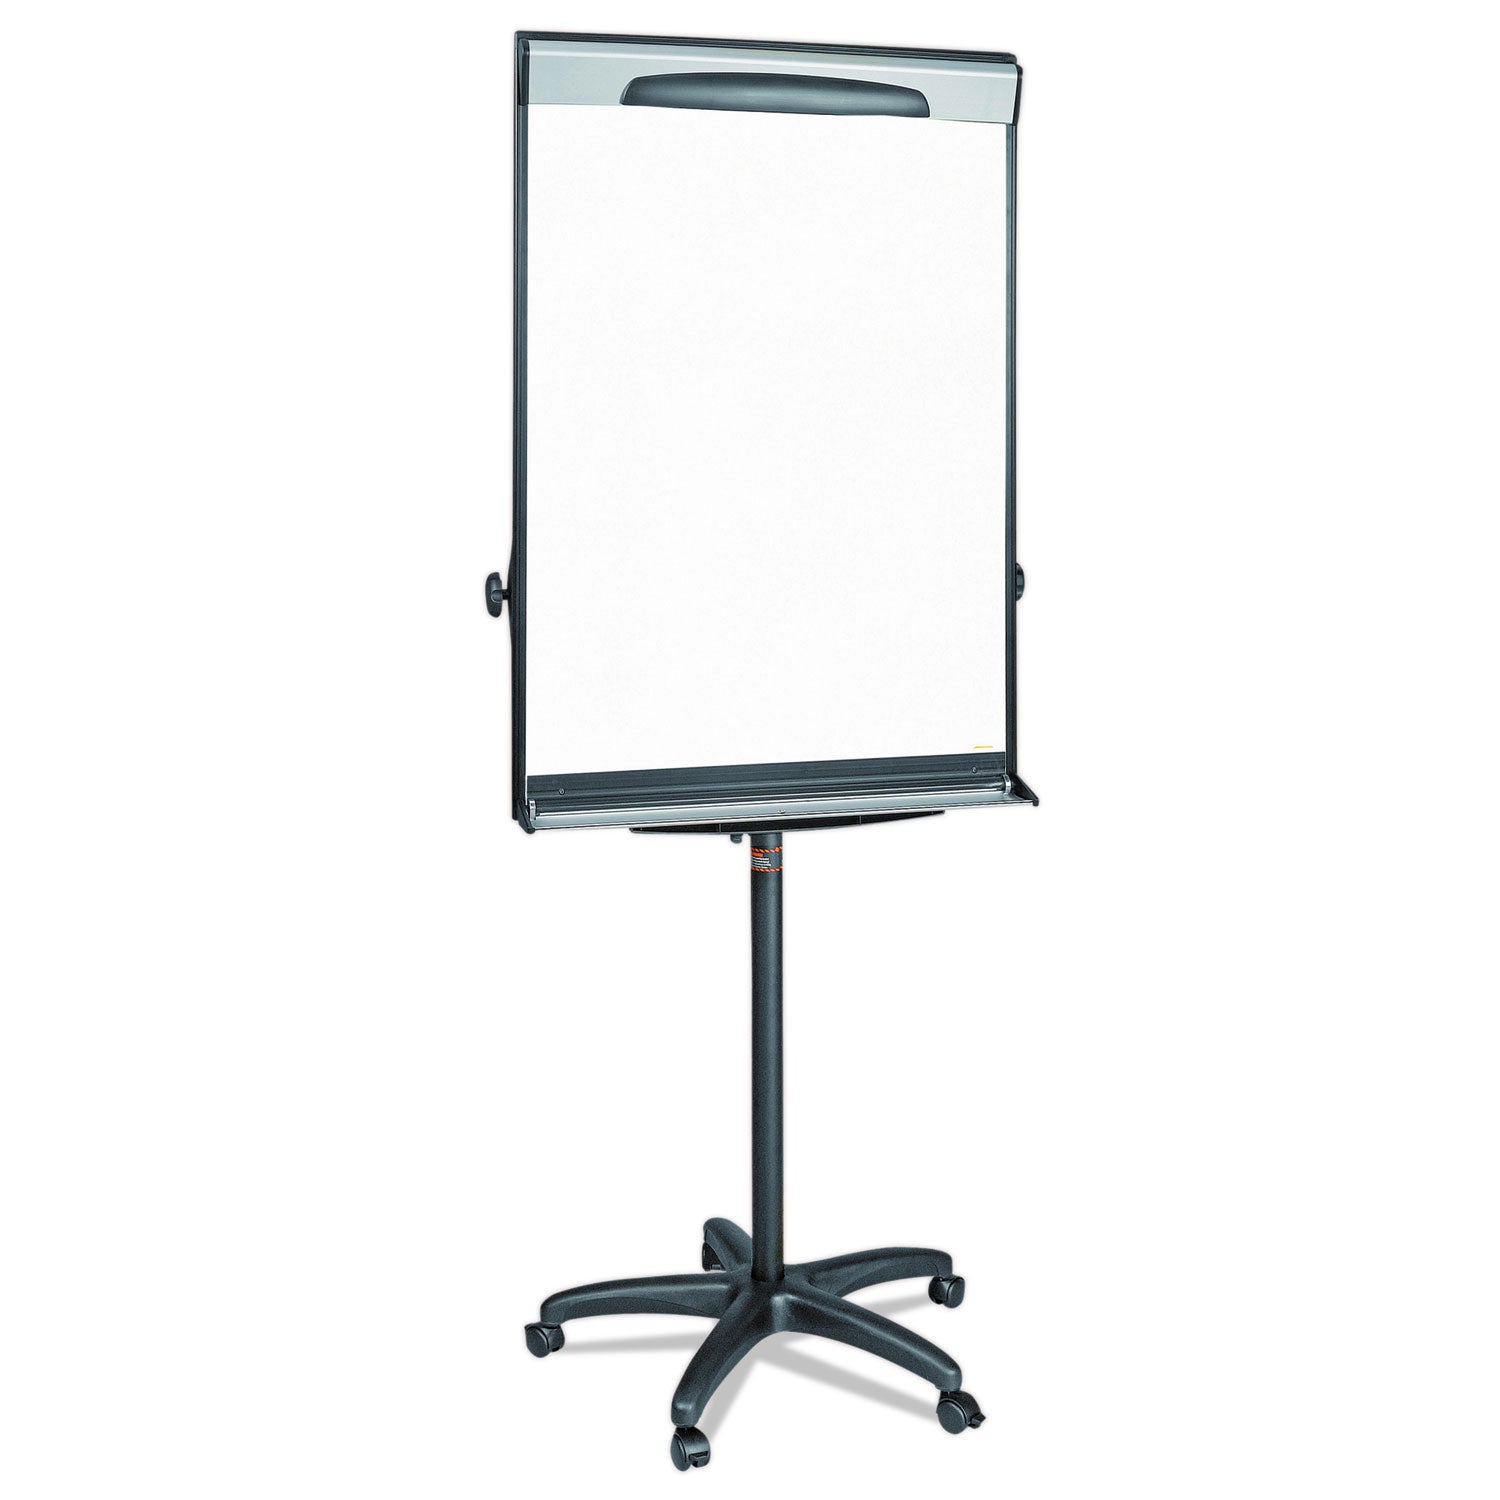 Tripod Extension Bar Magnetic Dry-Erase Easel, 69" to 78" High, Black/Silver - 